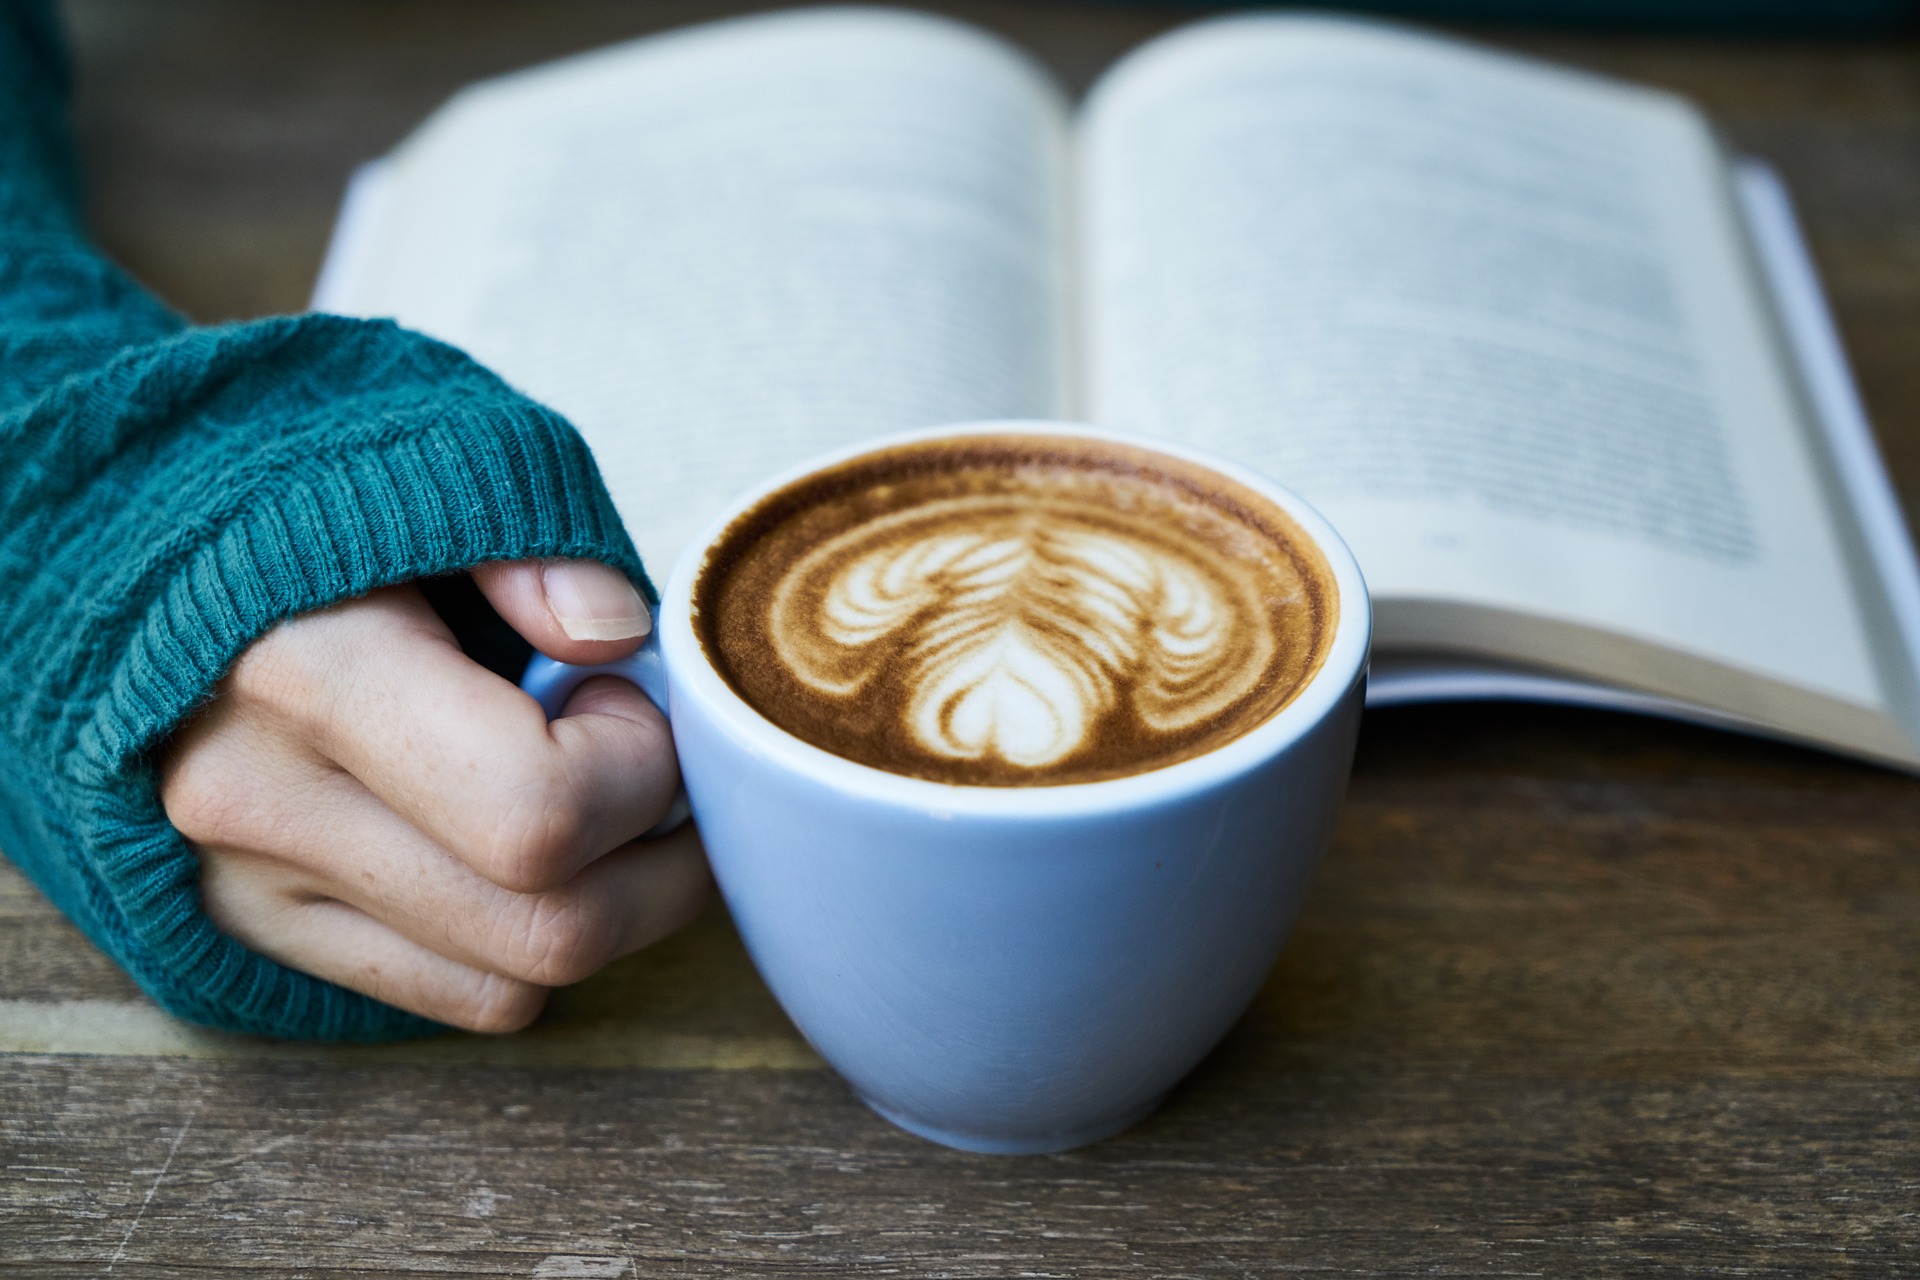 Hand holding a coffee mug in front of a book.